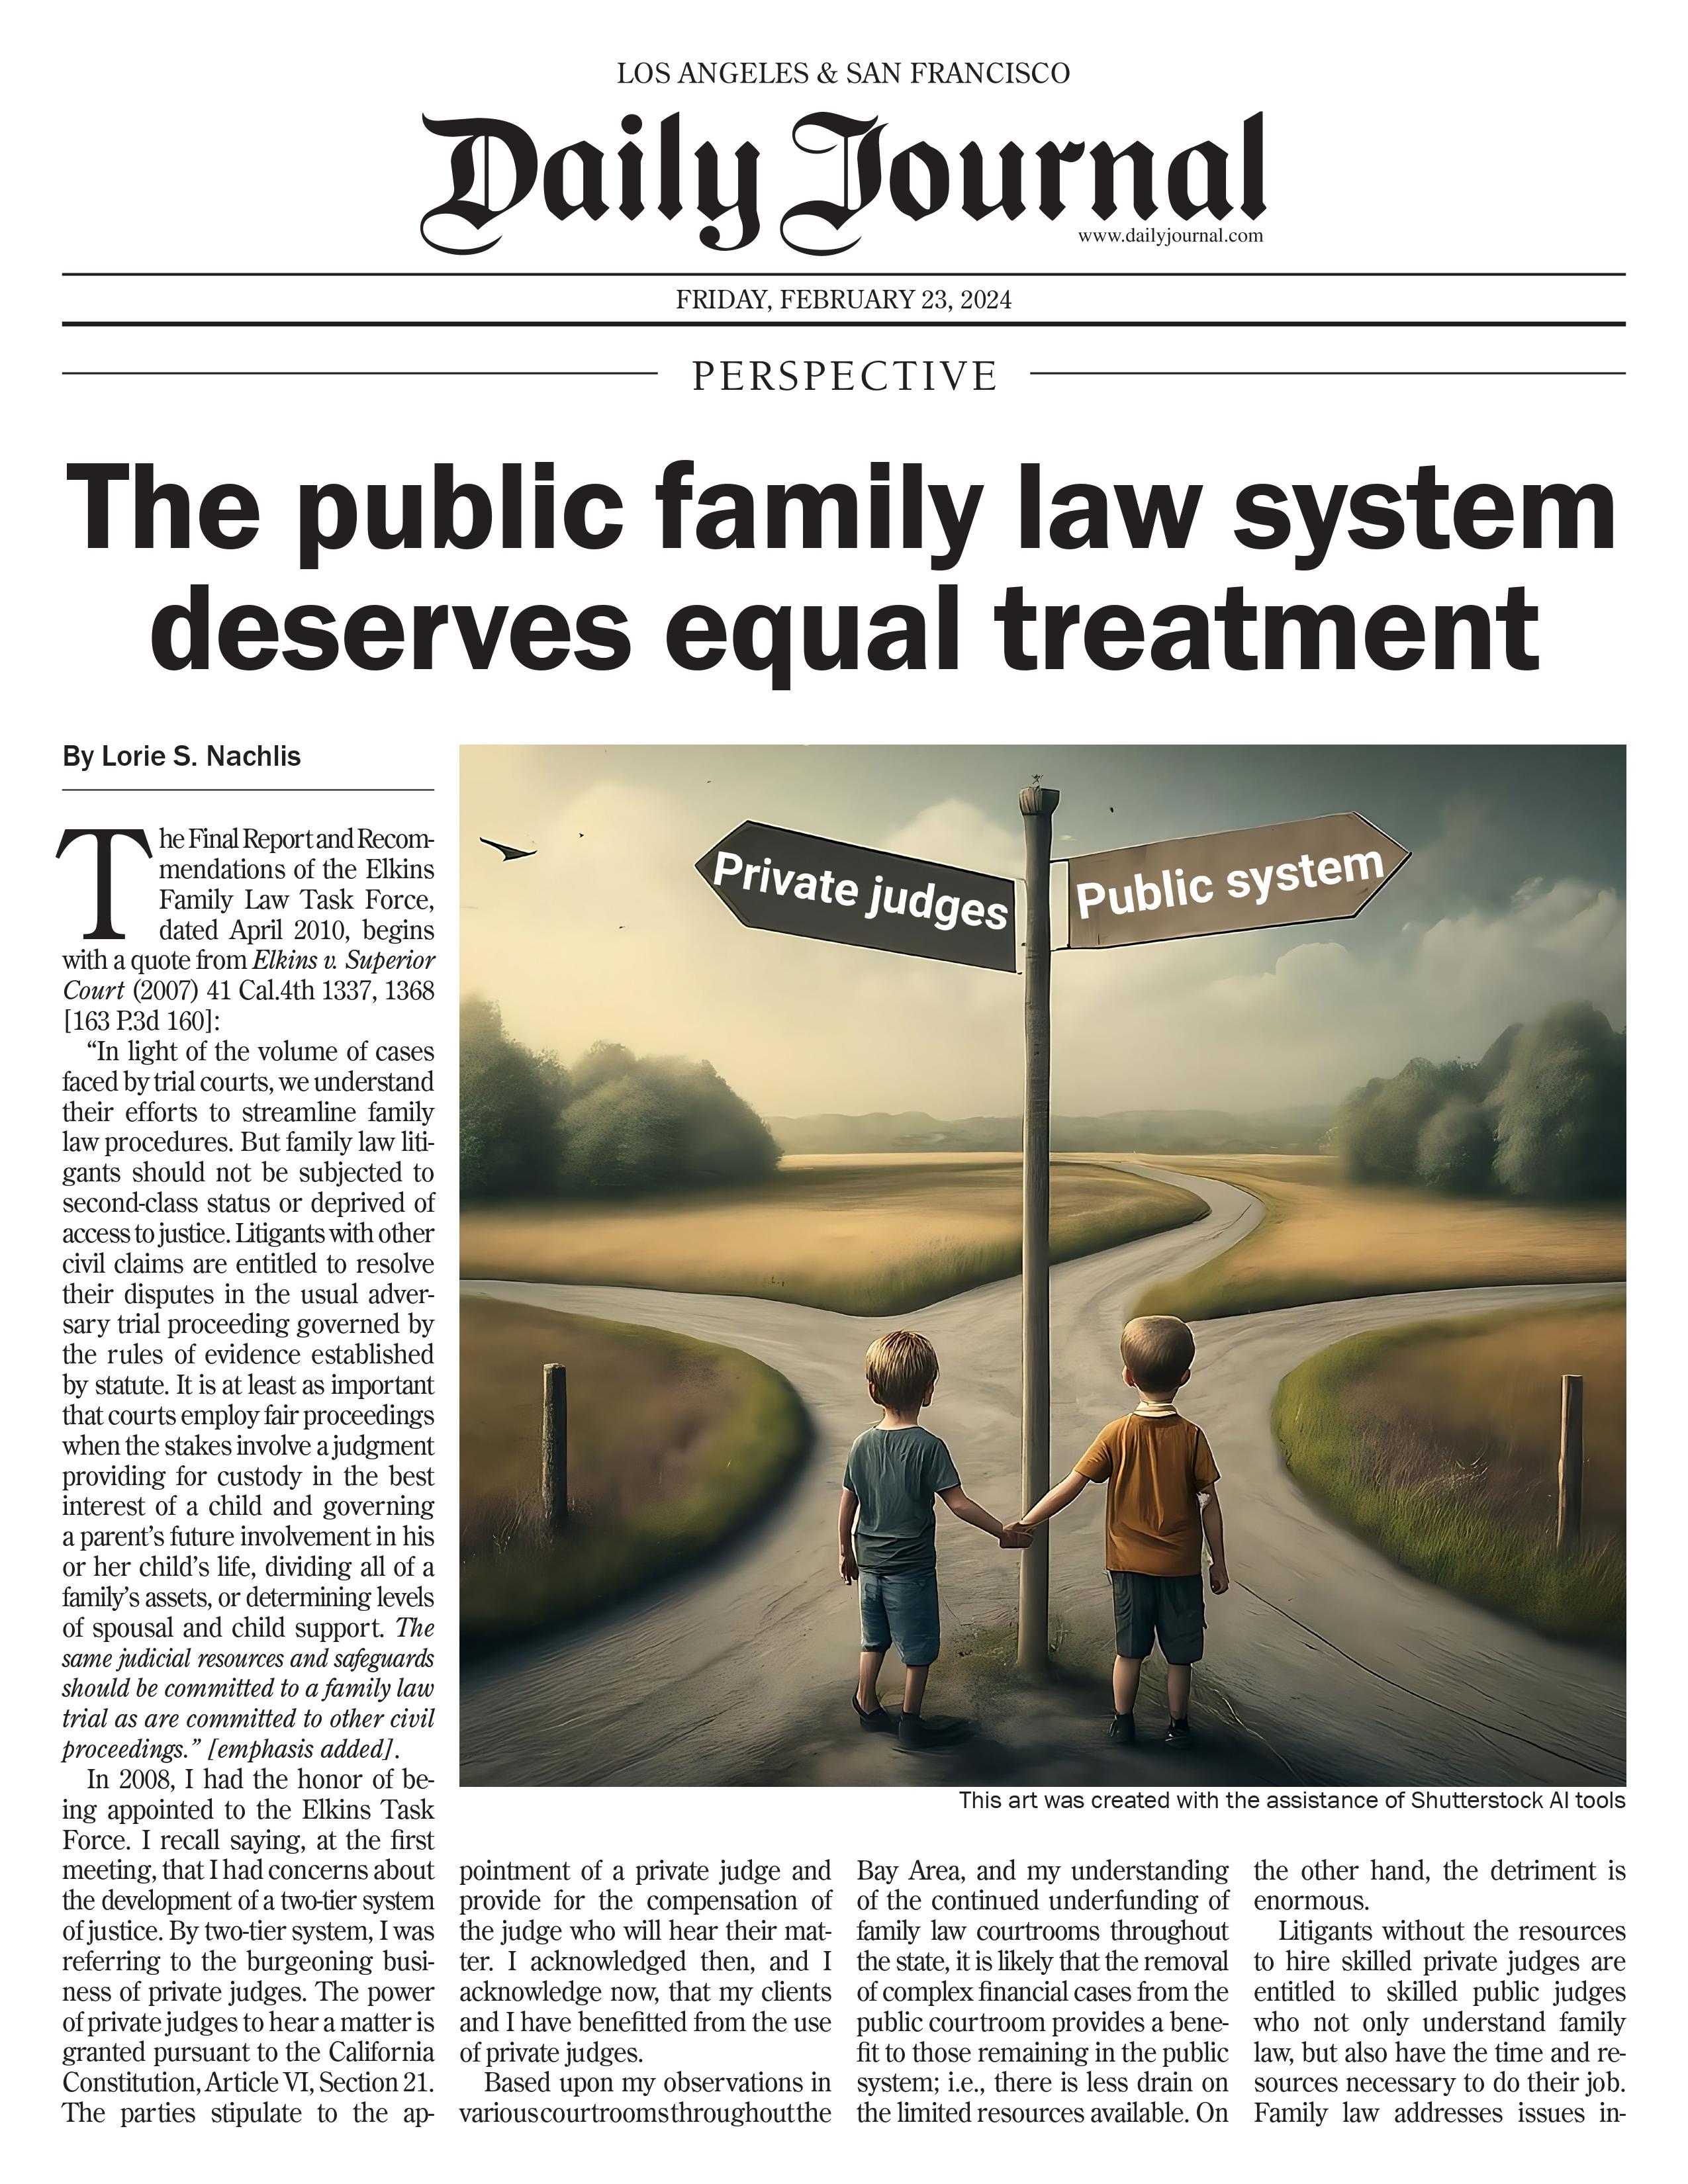 Daily Journal Article by Attorney Lorie Nachlis